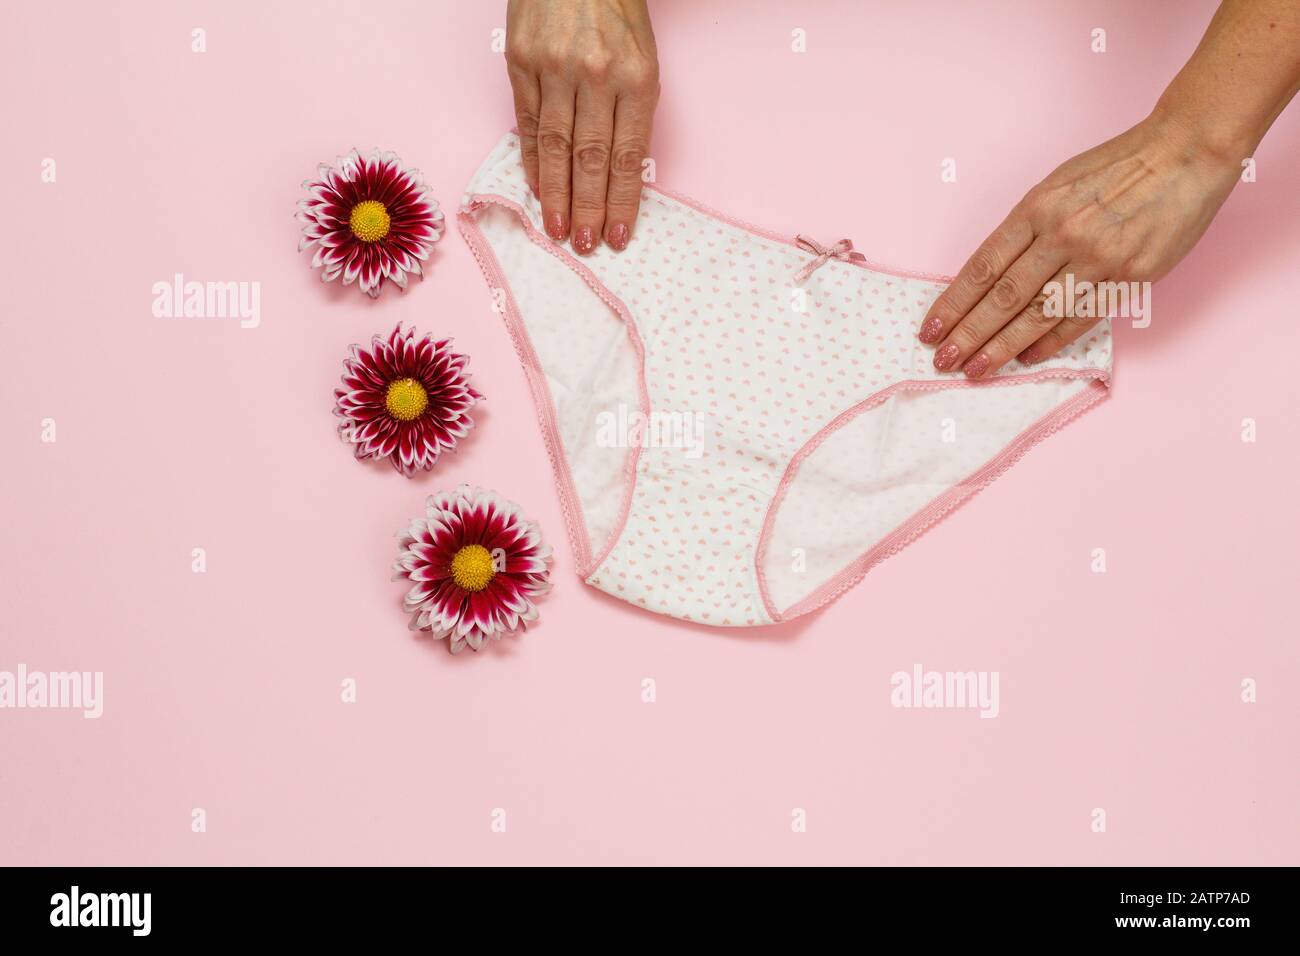 Women's hands holding beautiful cotton white panties on pink background with red flowers buds. Woman underwear set. Top view. Stock Photo